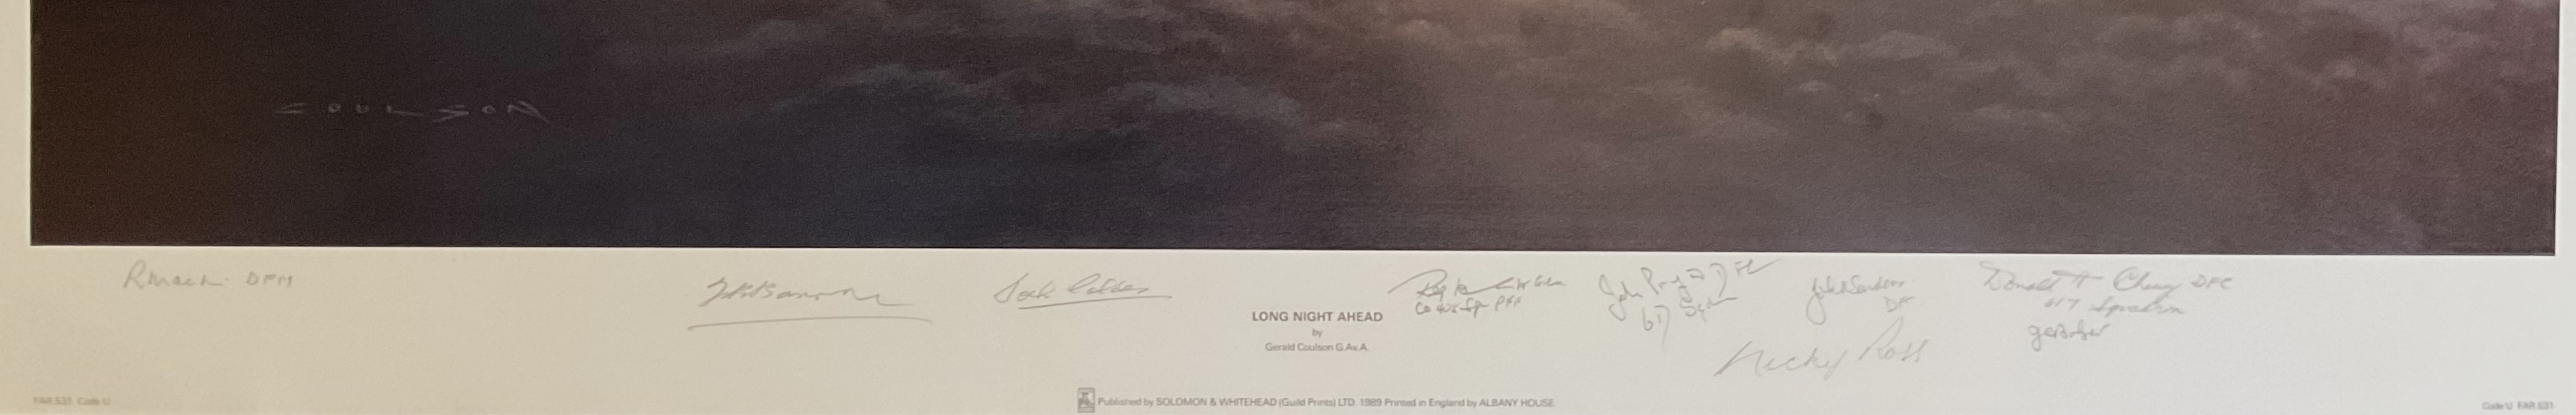 World War Two print 25x33 titled Long Night Ahead by the artist Gerald Coulson signed by 10 bomber - Image 2 of 3